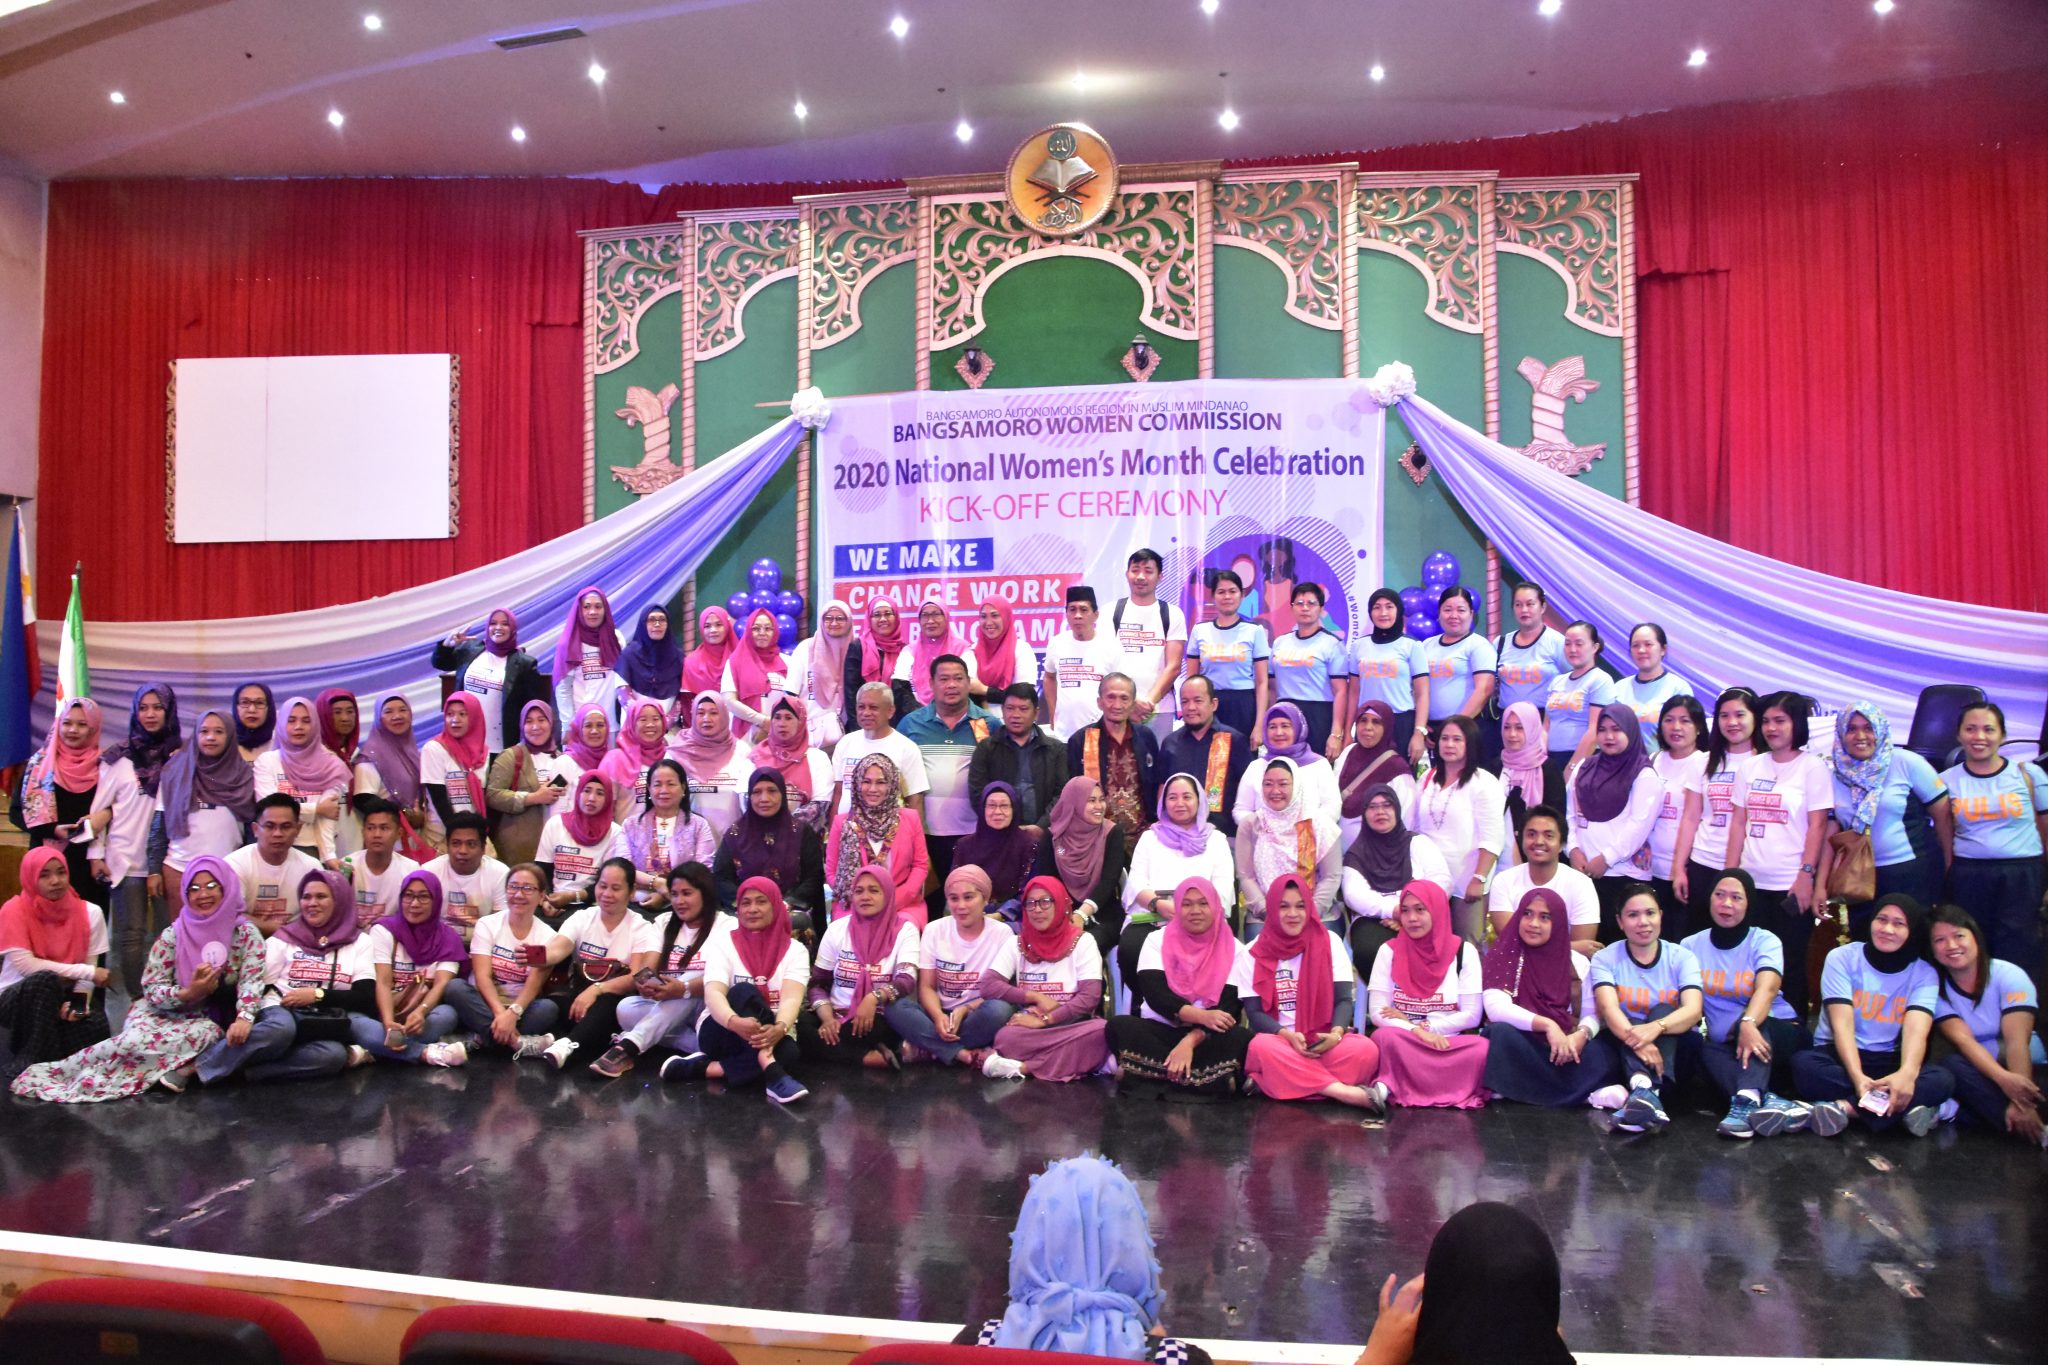 BWC-BARMM conducted the Kick-Off of the 2020 National Women’s Month  in the BARMM